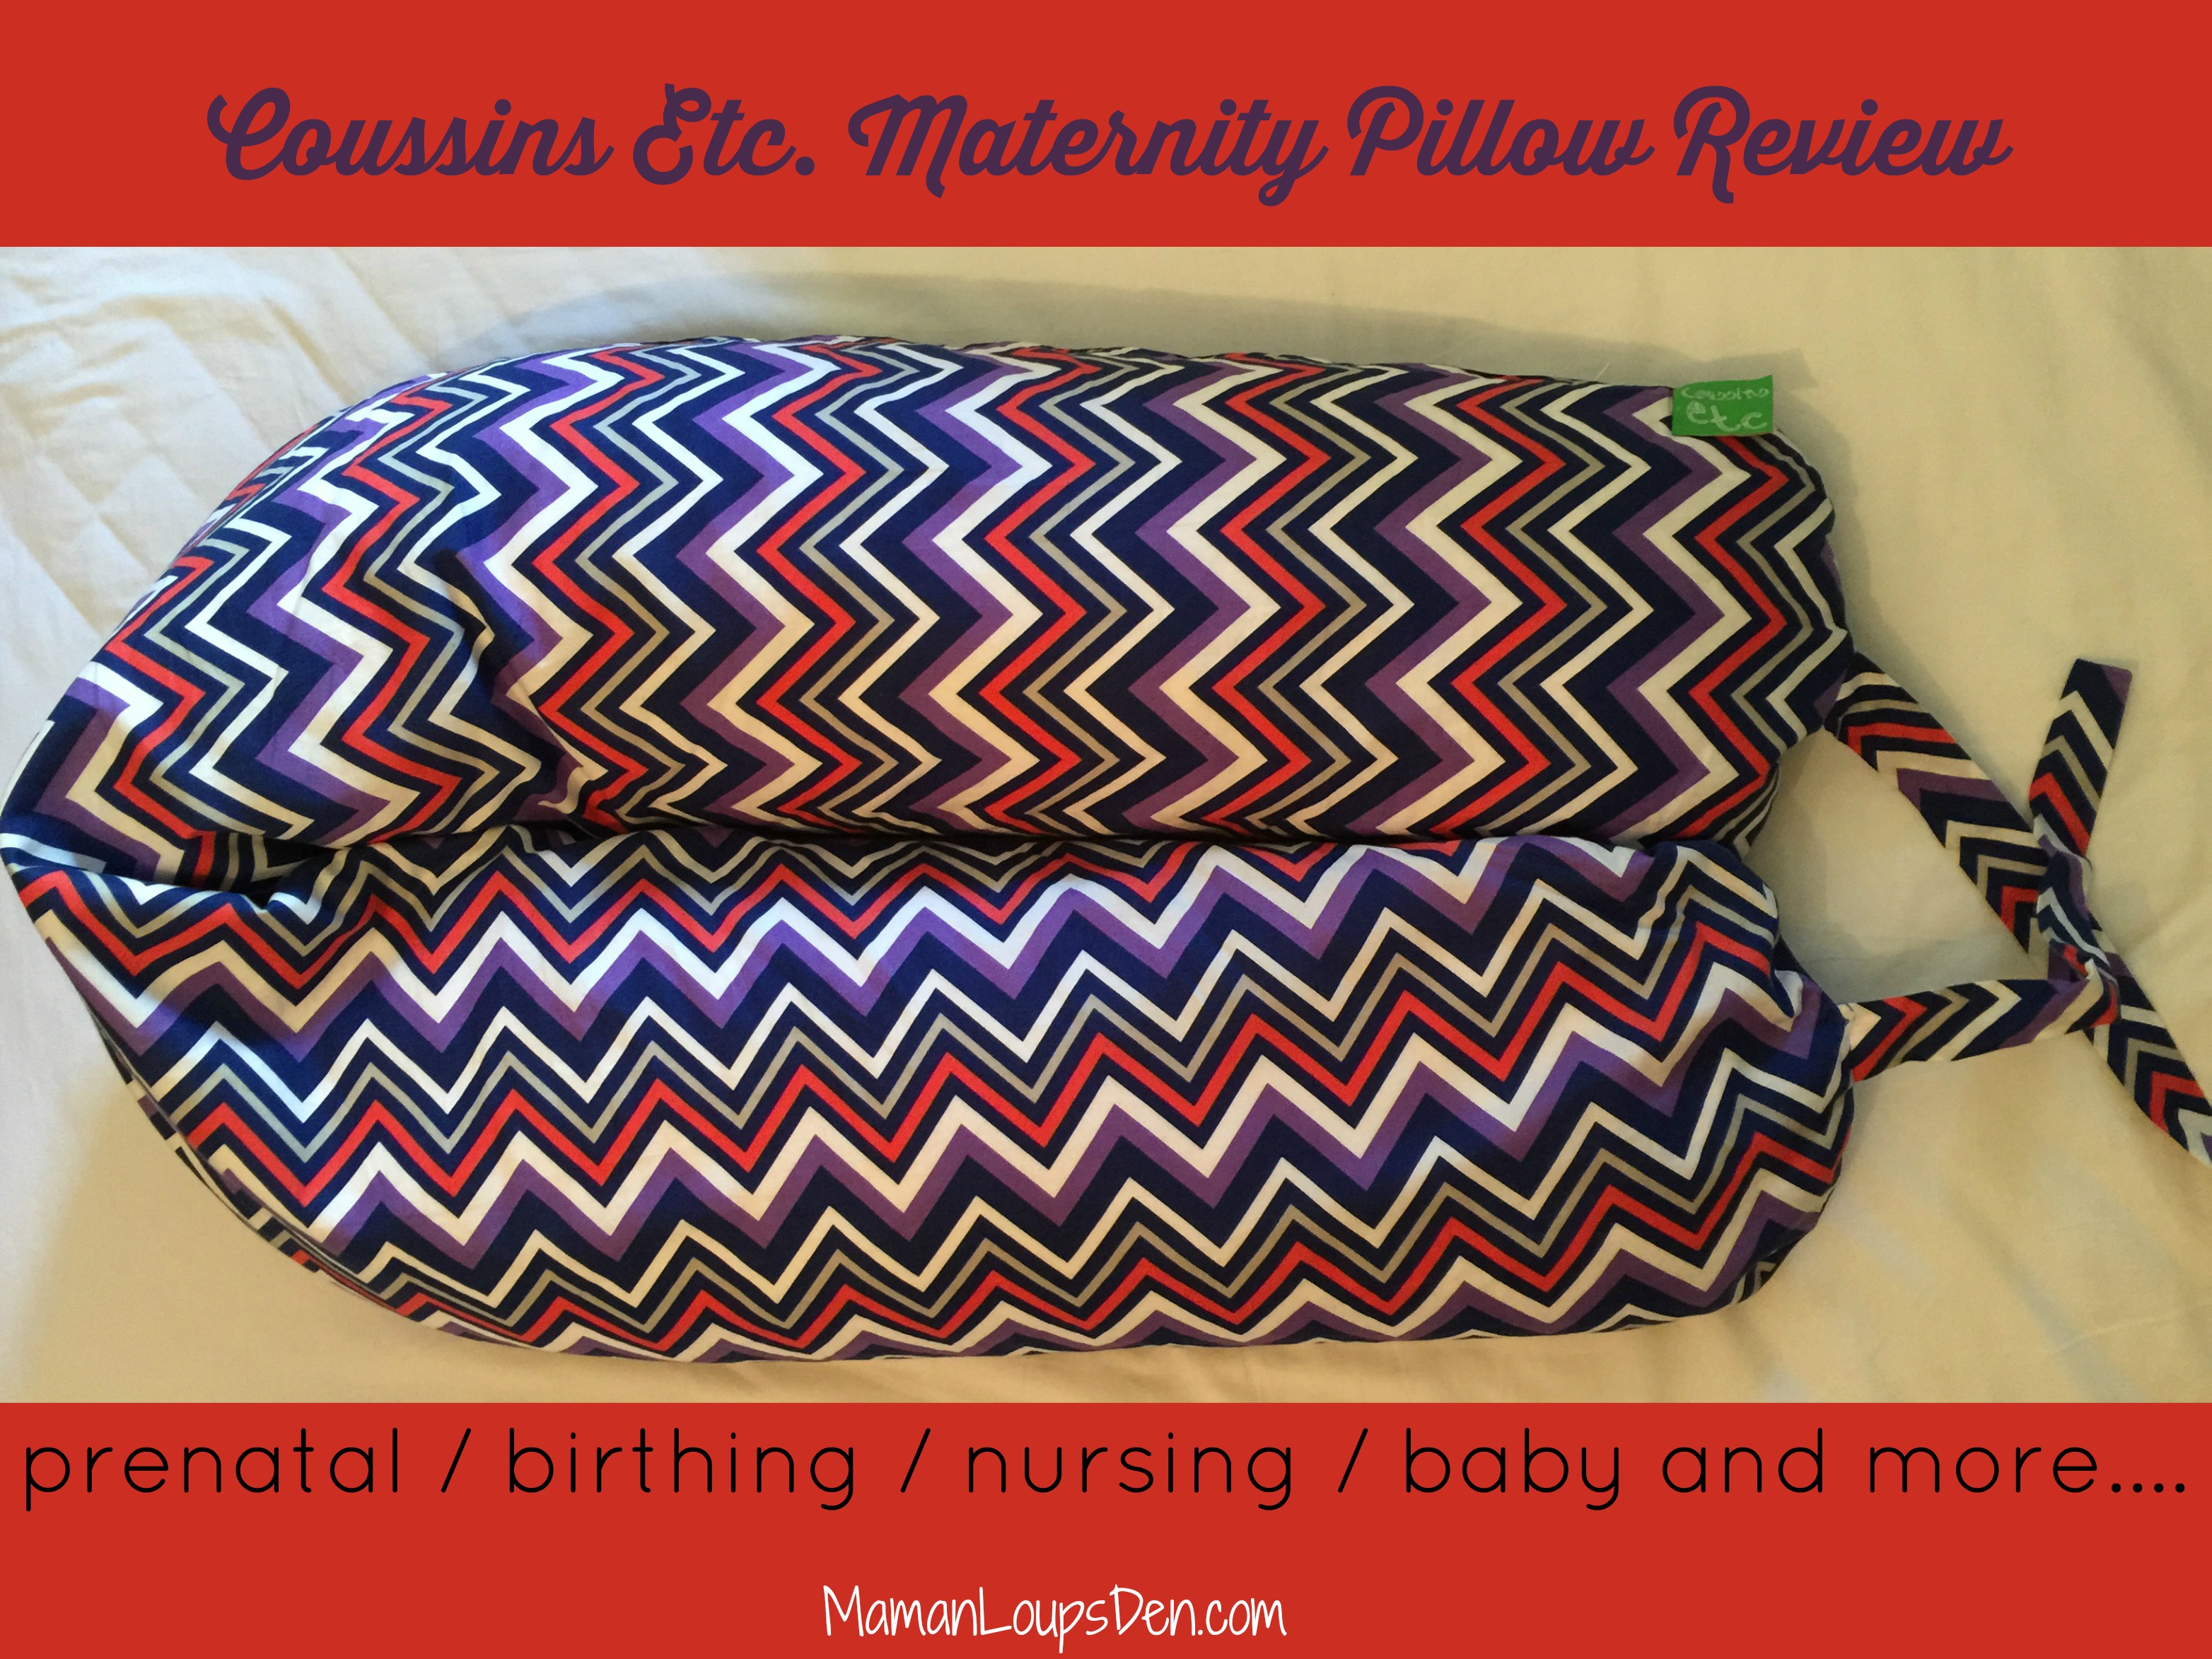 Coussins Etc. Maternity Body Pillow Review